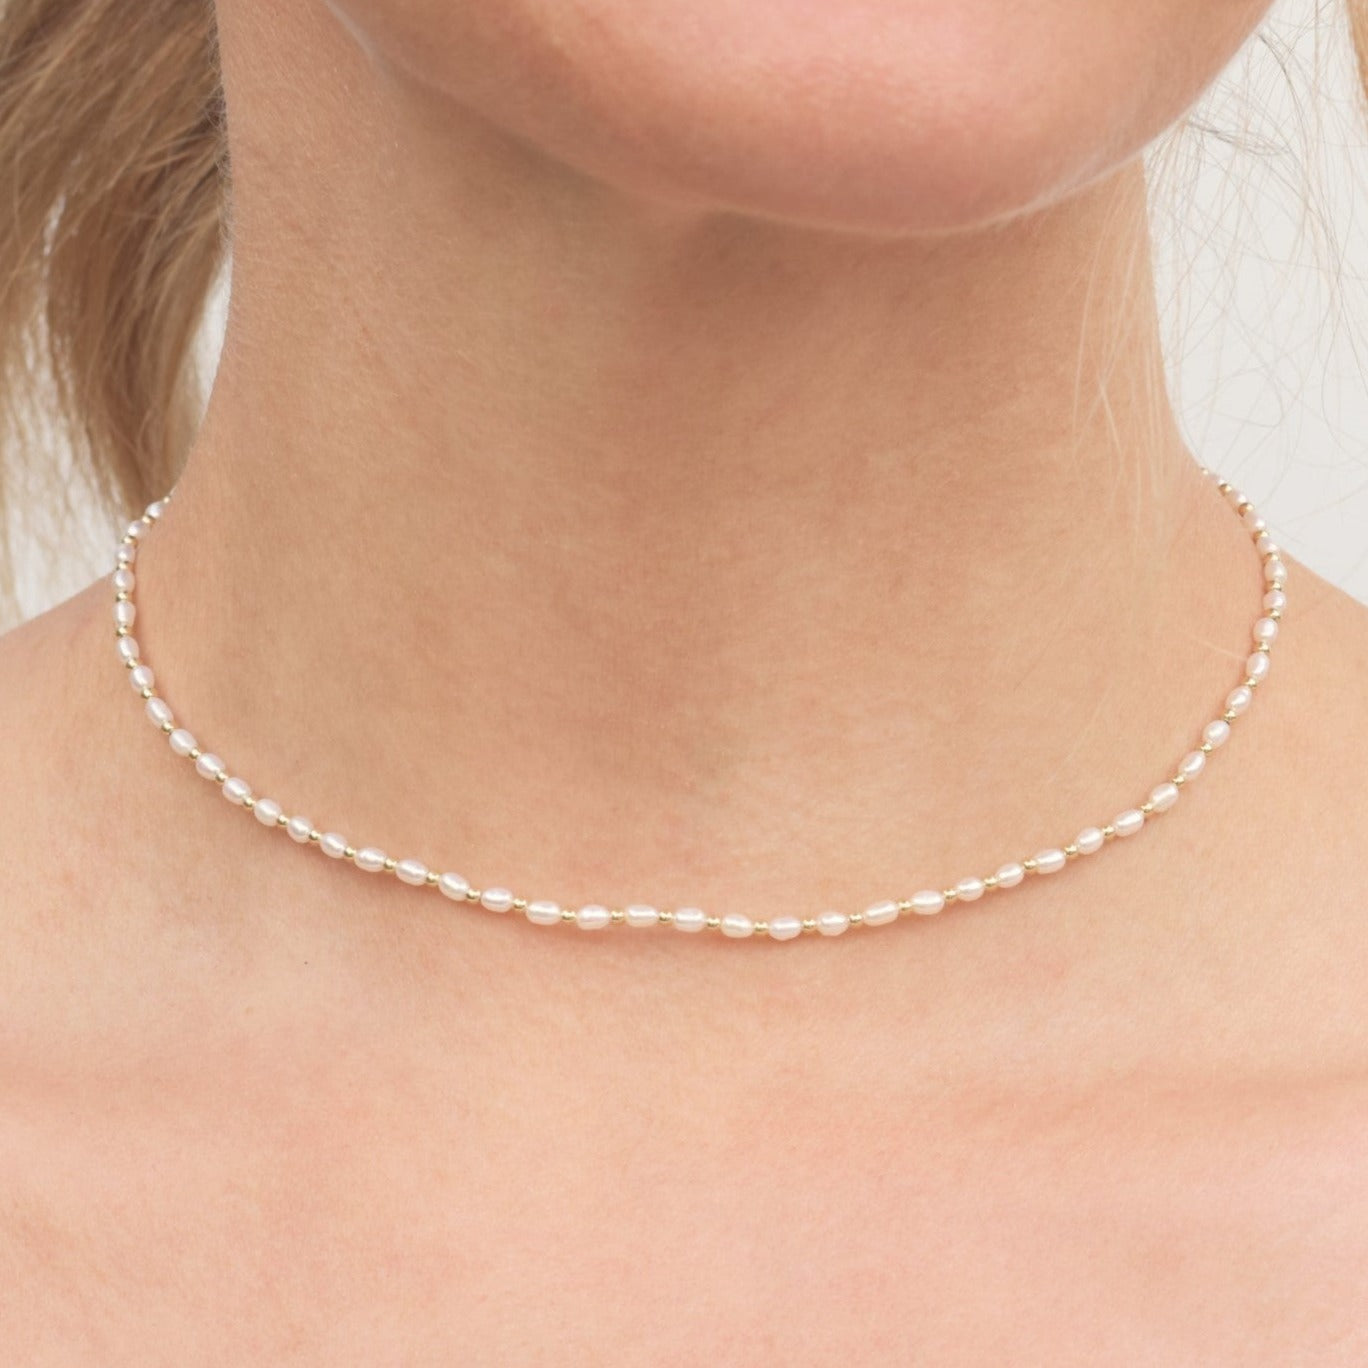 Closeup of women's neck wearing tiny pearl and bead choker necklace